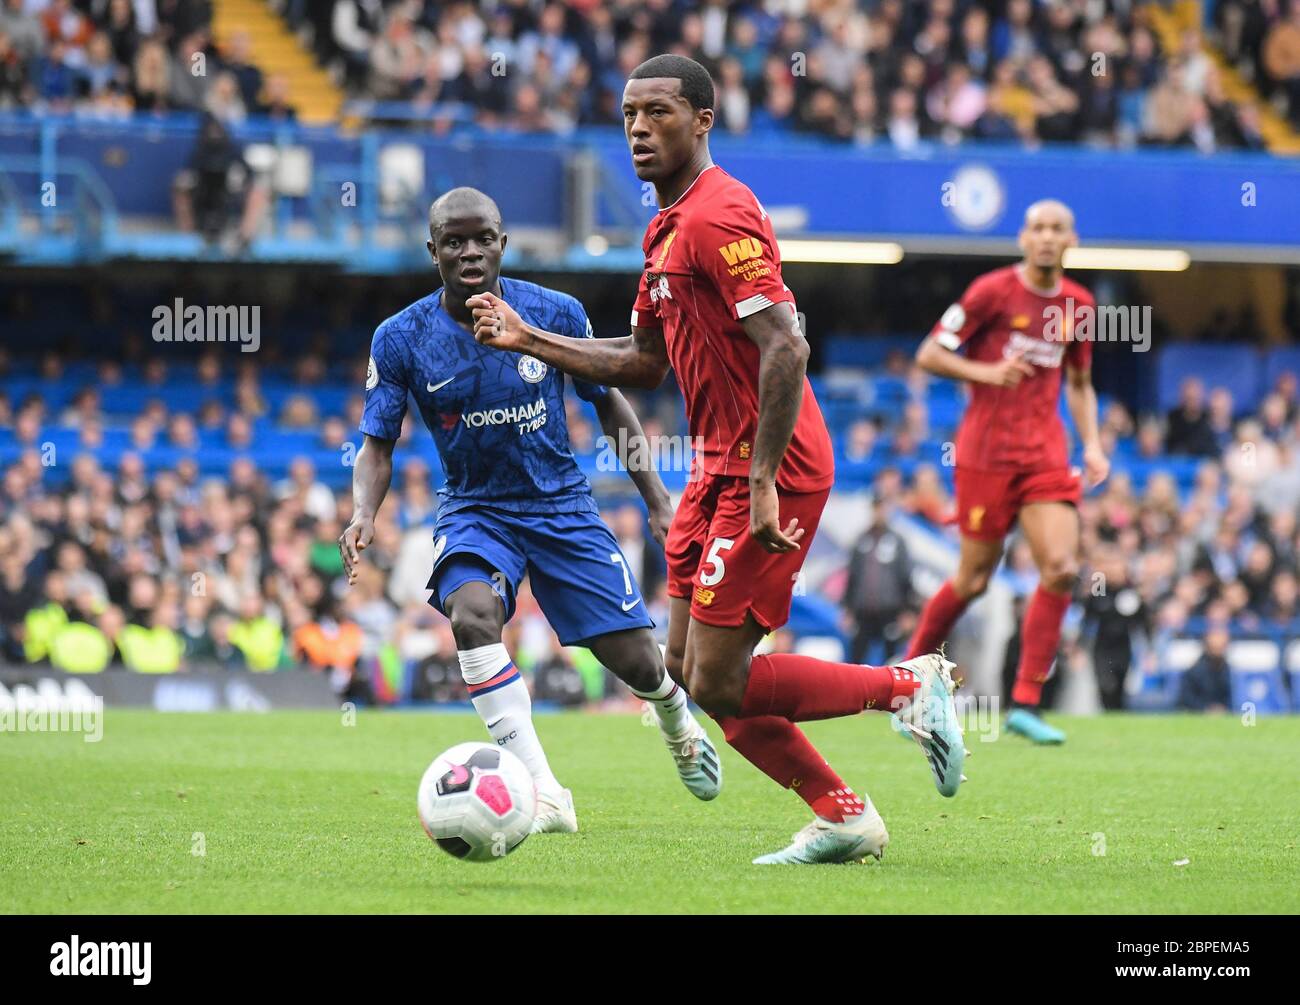 LONDON, ENGLAND - SEPTEMBER 22, 2019: Georginio Wijnaldum of Liverpool pictured during the 2019/20 Premier League game between Chelsea FC and Liverpool FC at Stamford Bridge. Stock Photo